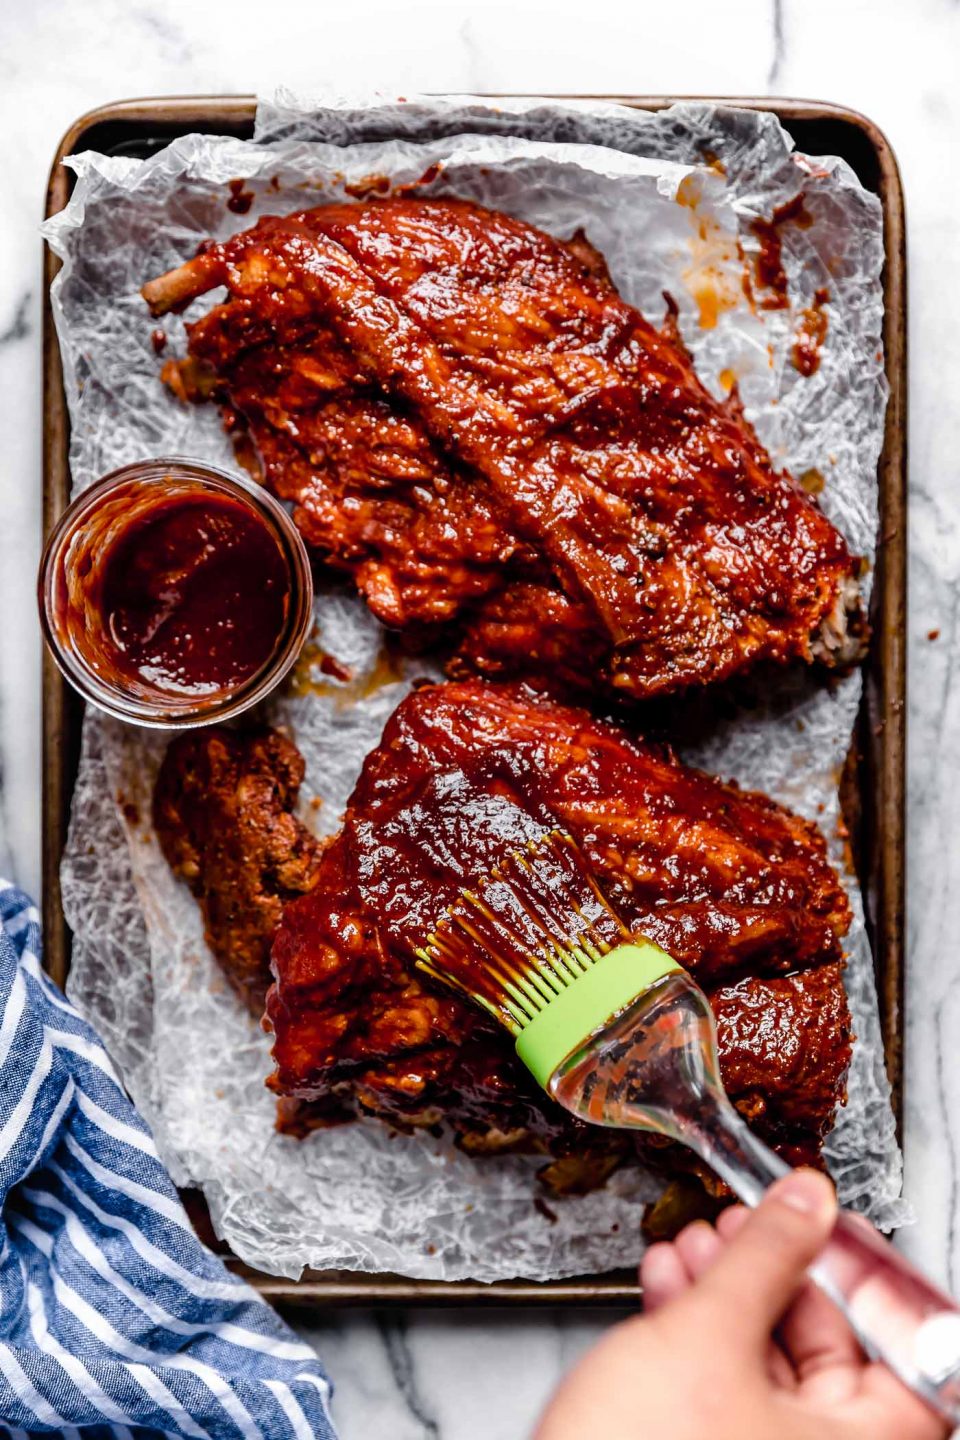 Baby back ribs sitting on a parchment-paper lined baking sheet. Woman's hand is brushing the ribs with BBQ sauce. The baking sheet is on a white marble surface with a striped blue linen nearby.